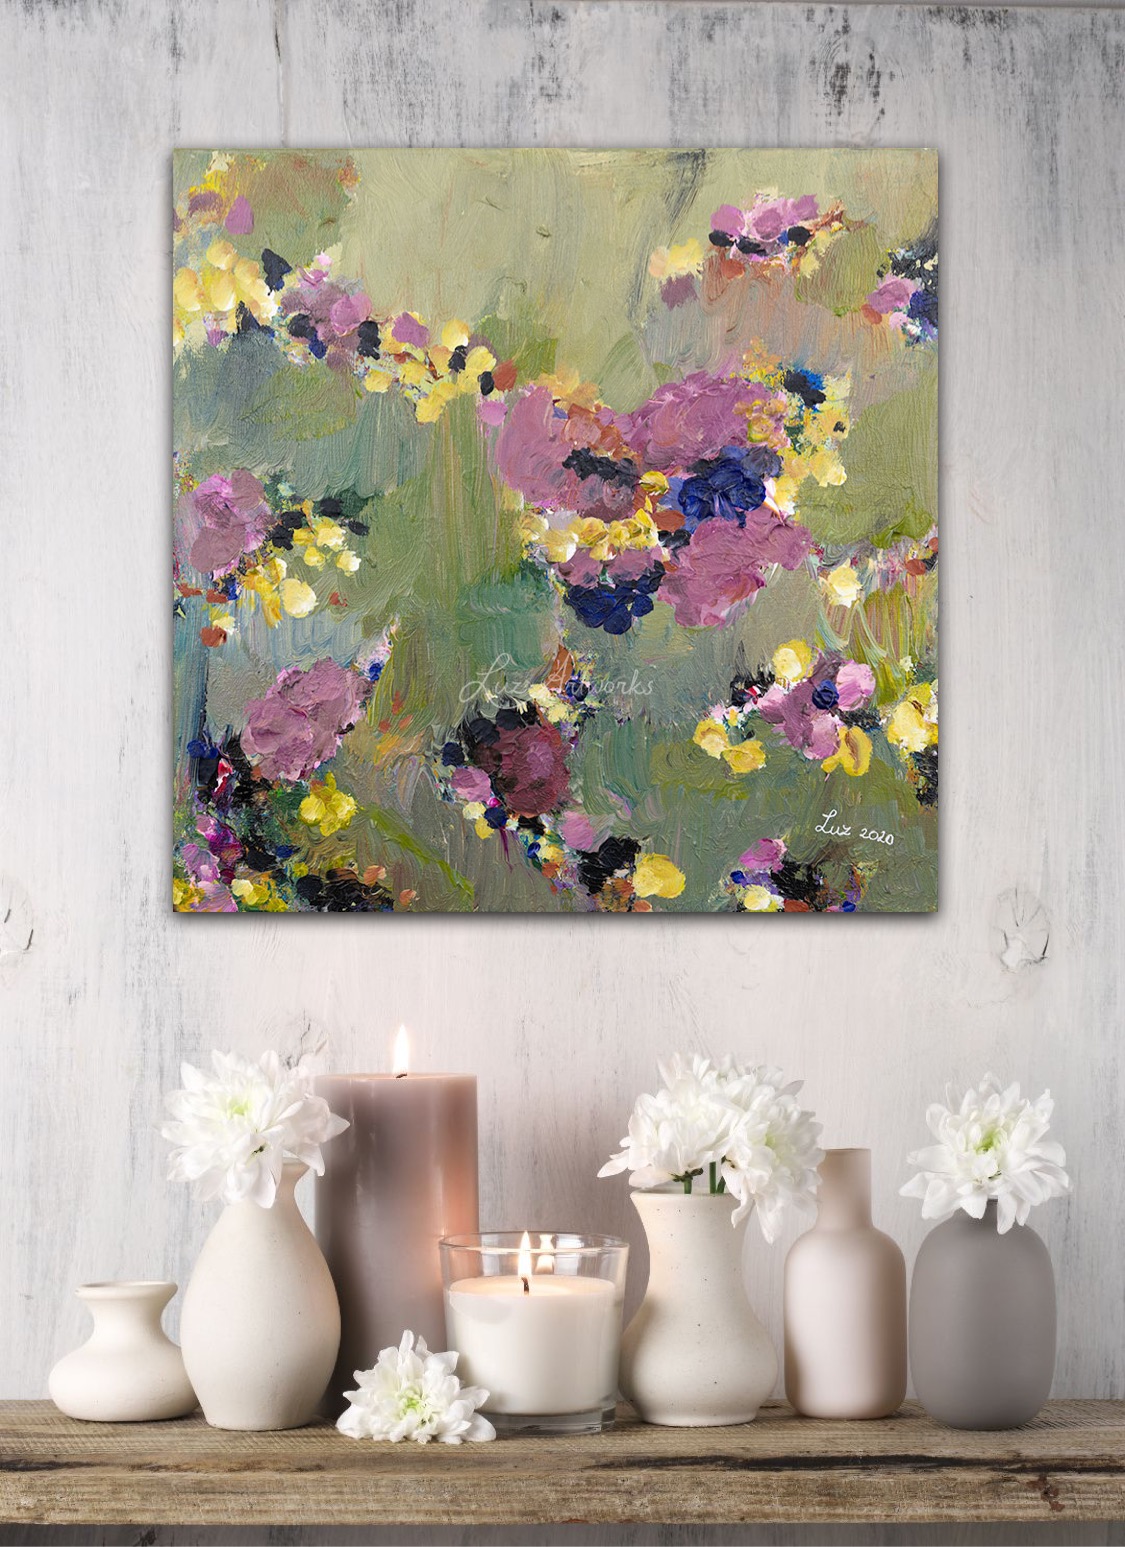 Painting Magical Garden - Marloes Bloedjes - Luz Artworks - On the Wall